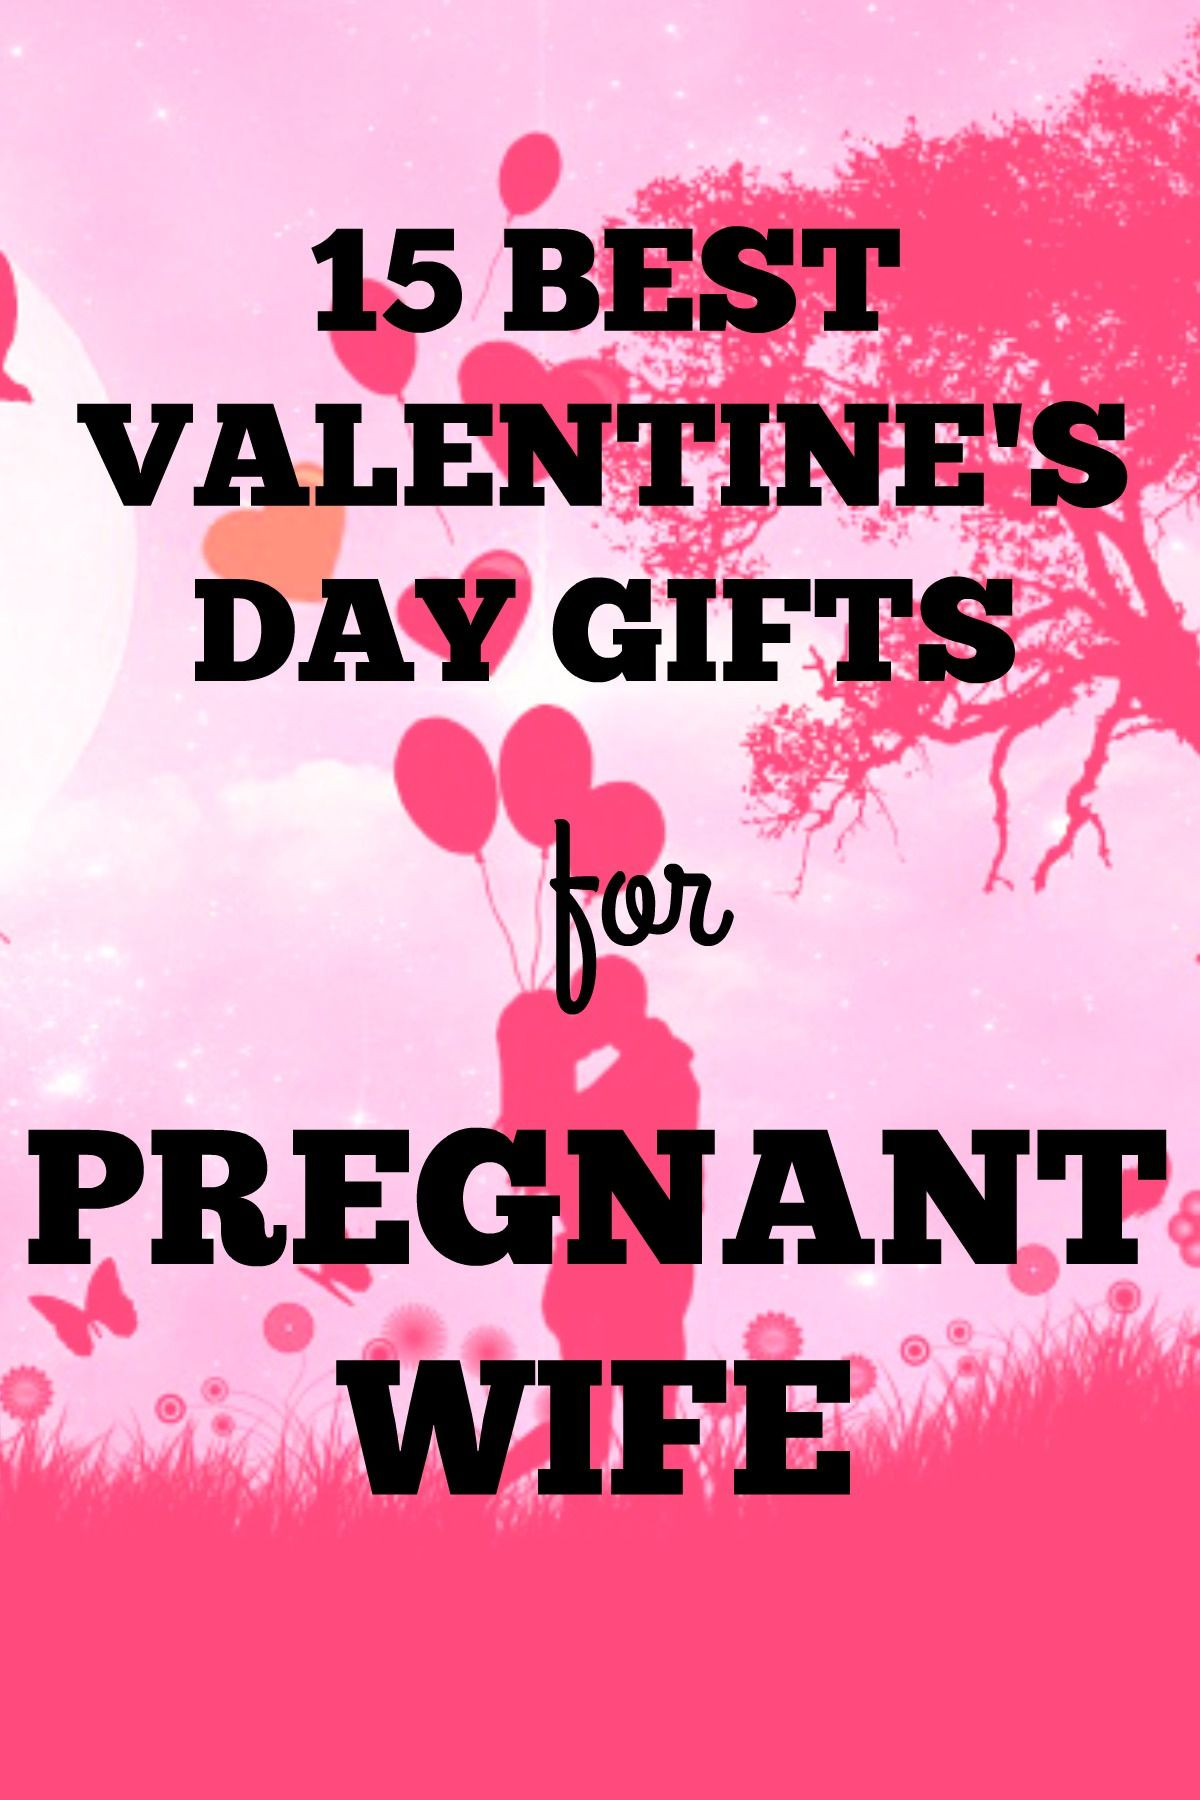 Birthday Gift Ideas For Pregnant Wife
 Best Valentines Day Gifts for Pregnant Wife